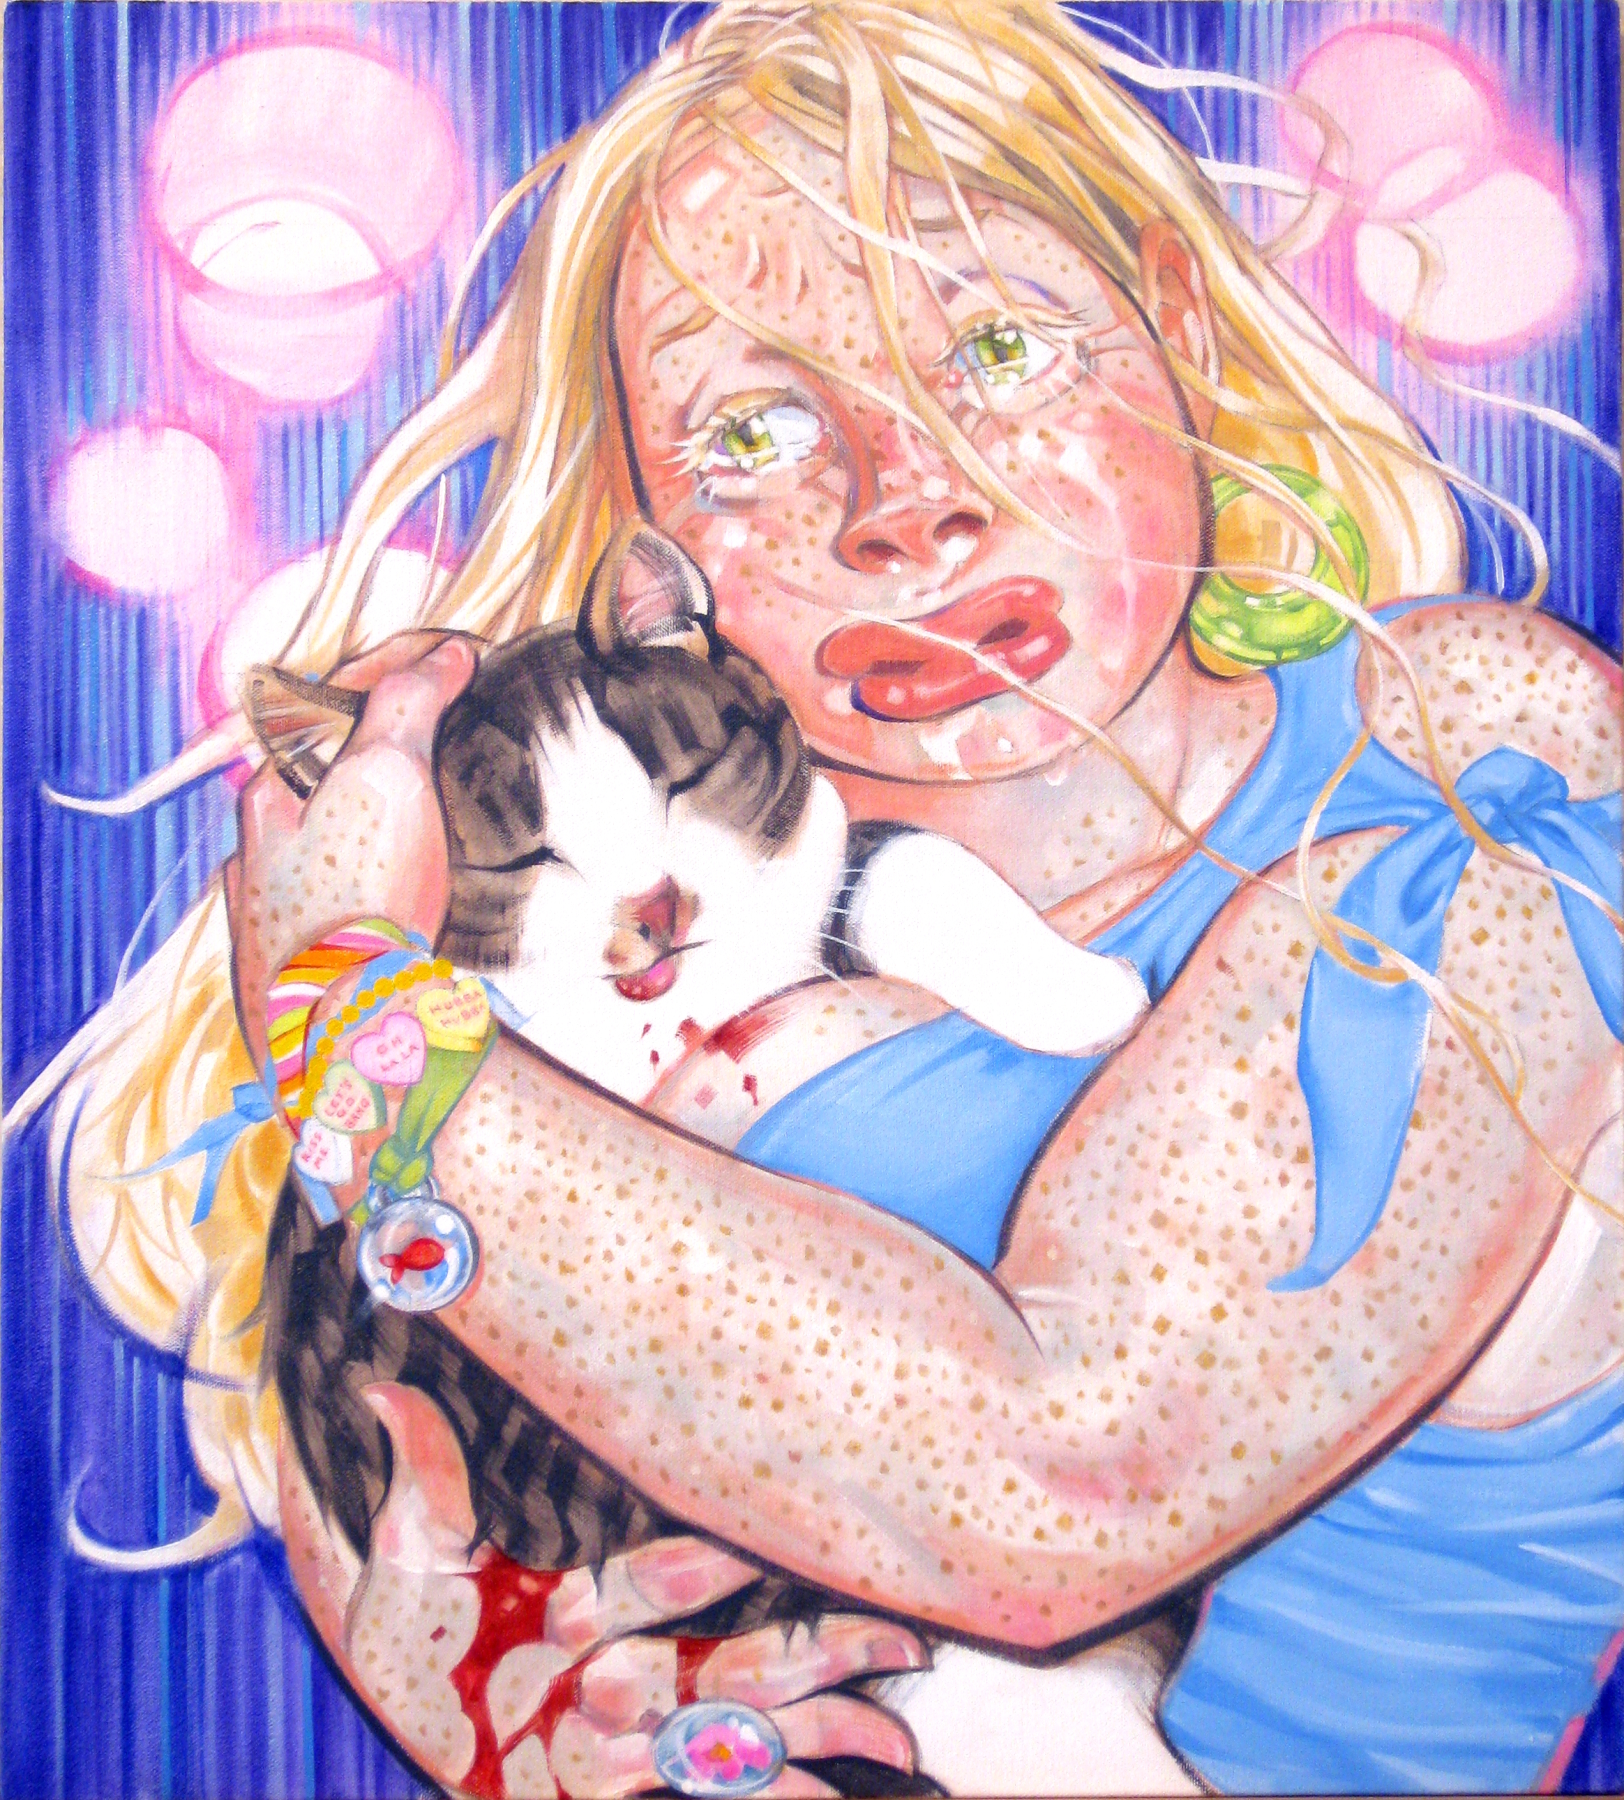 All Cats and Dogs Go to Heaven, 2009, courtesy of Carl Granados, oil on canvas, 22.5 x 20.5 inches, by Taiyo la Paix